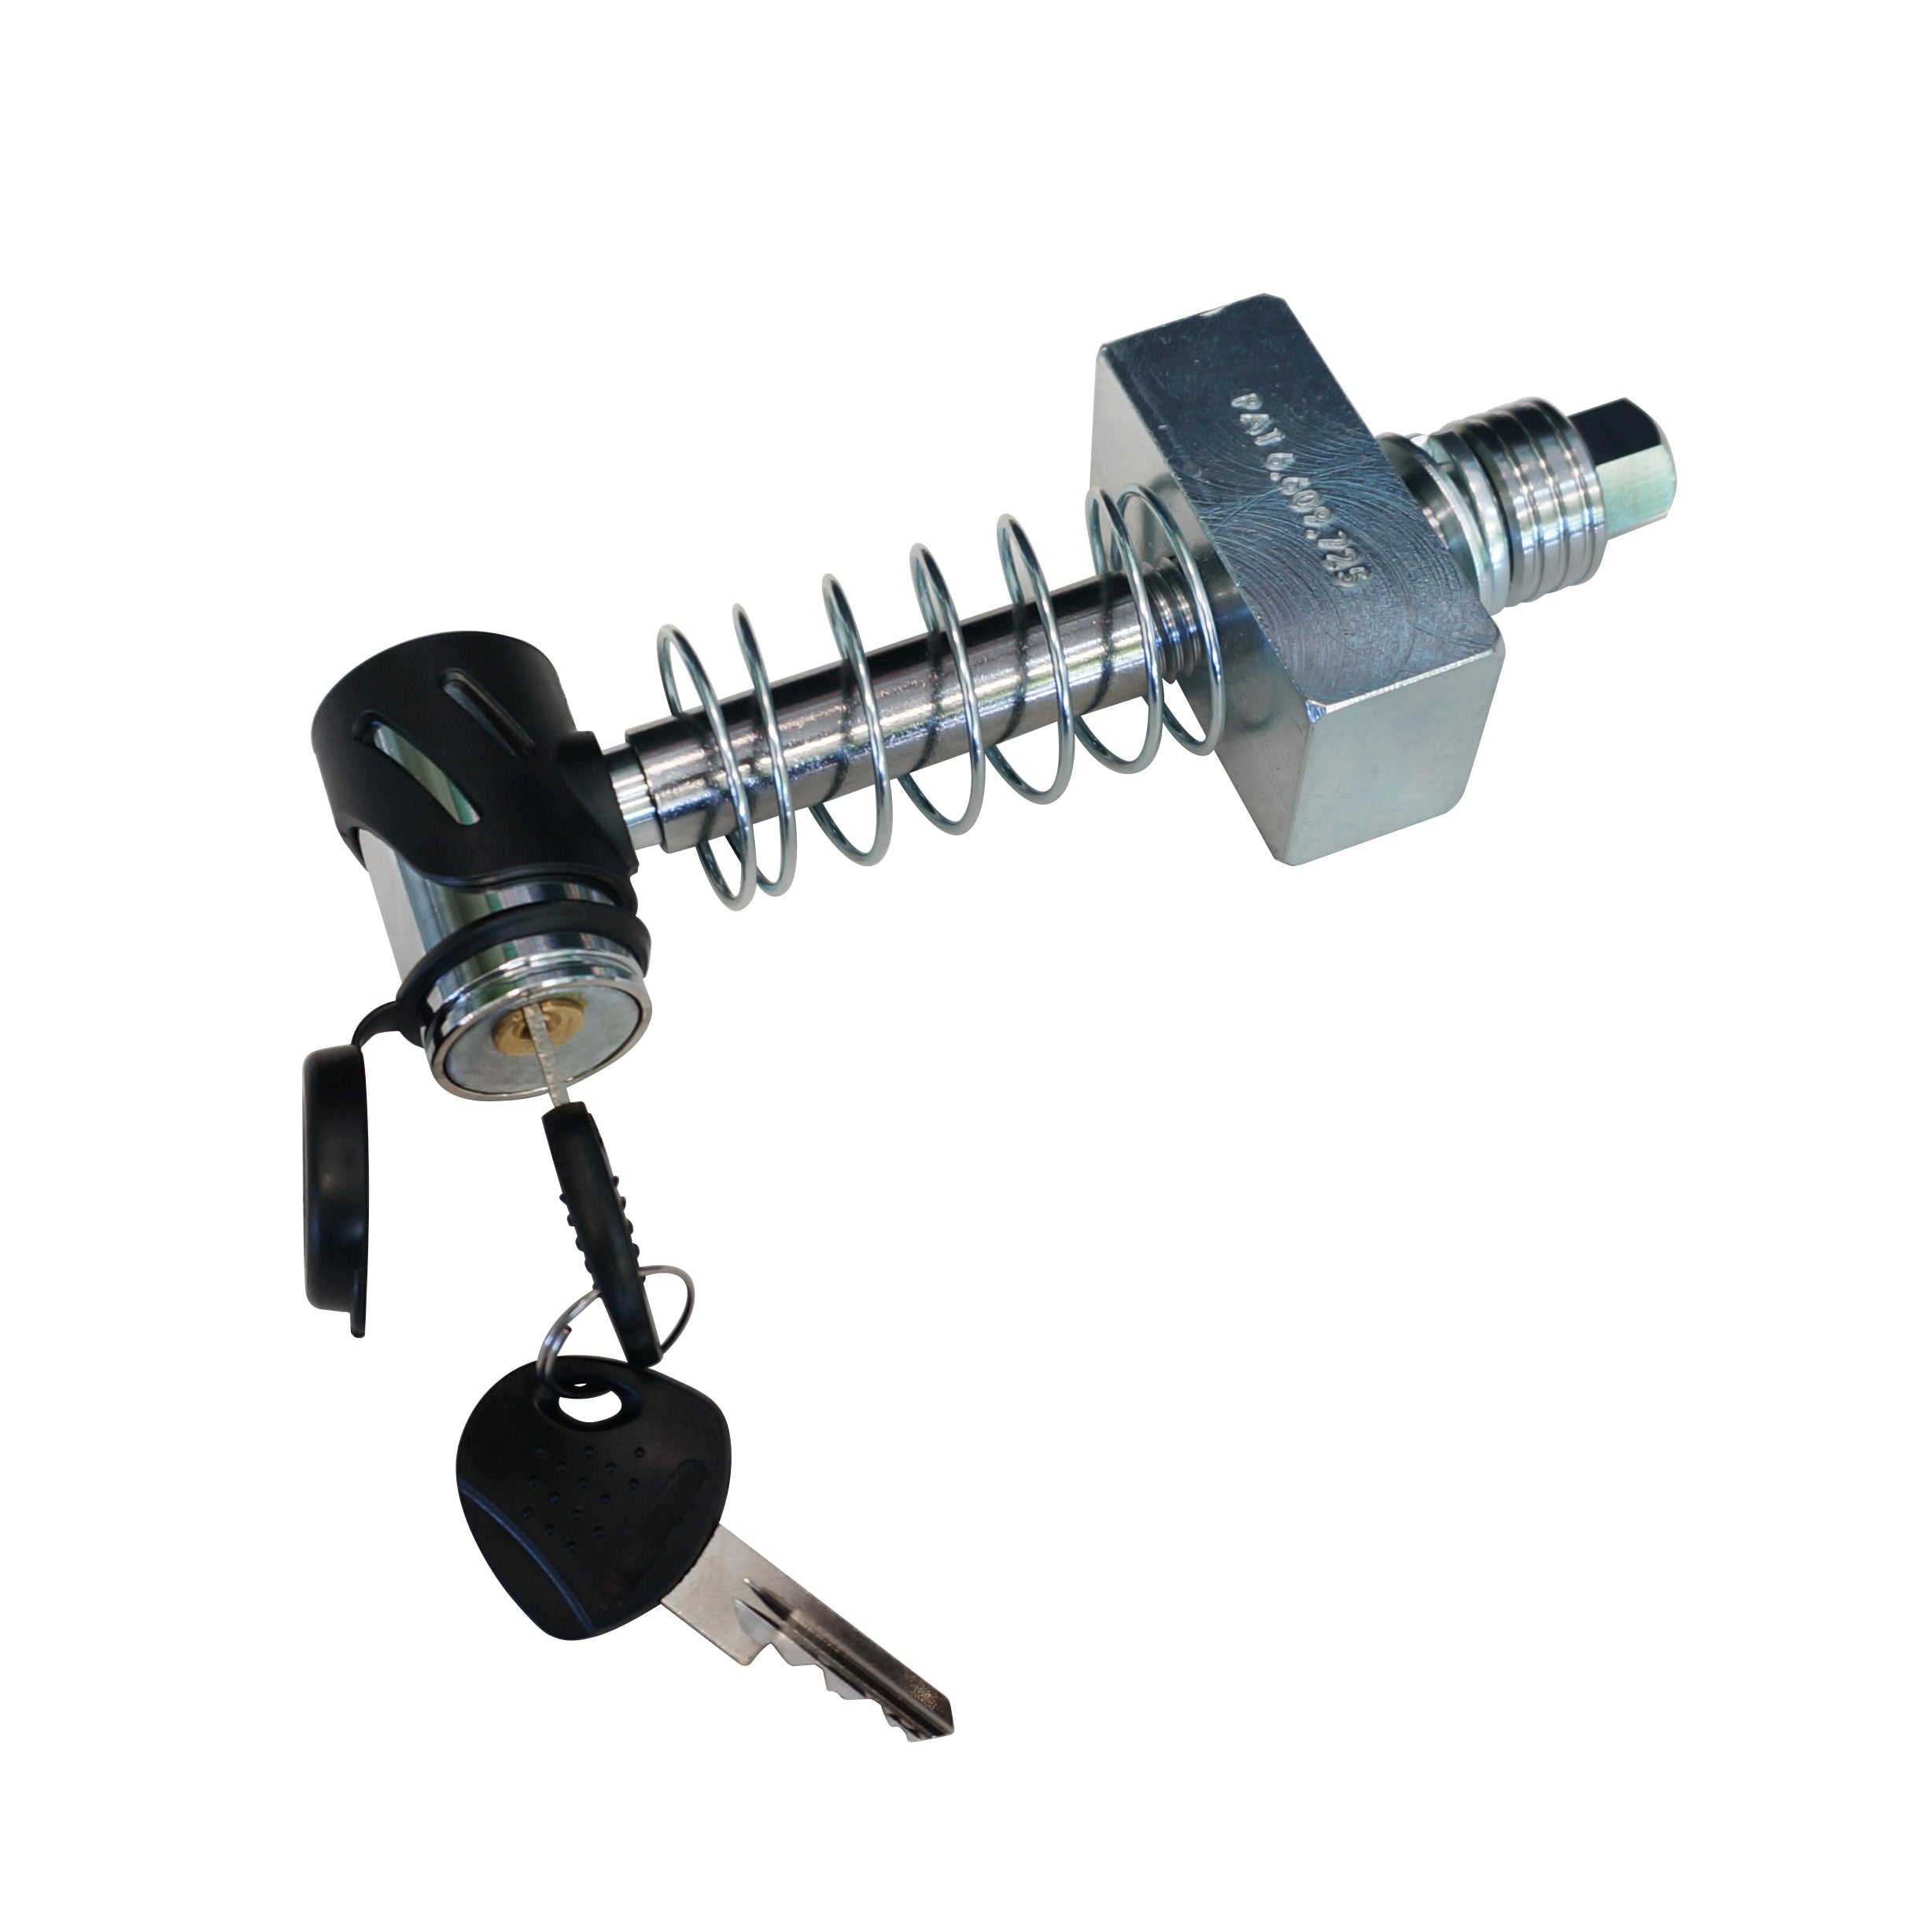 Silent Hitch Pin®: 5/8'' Press-On Locking Anti-Rattle for 3'' Hitches